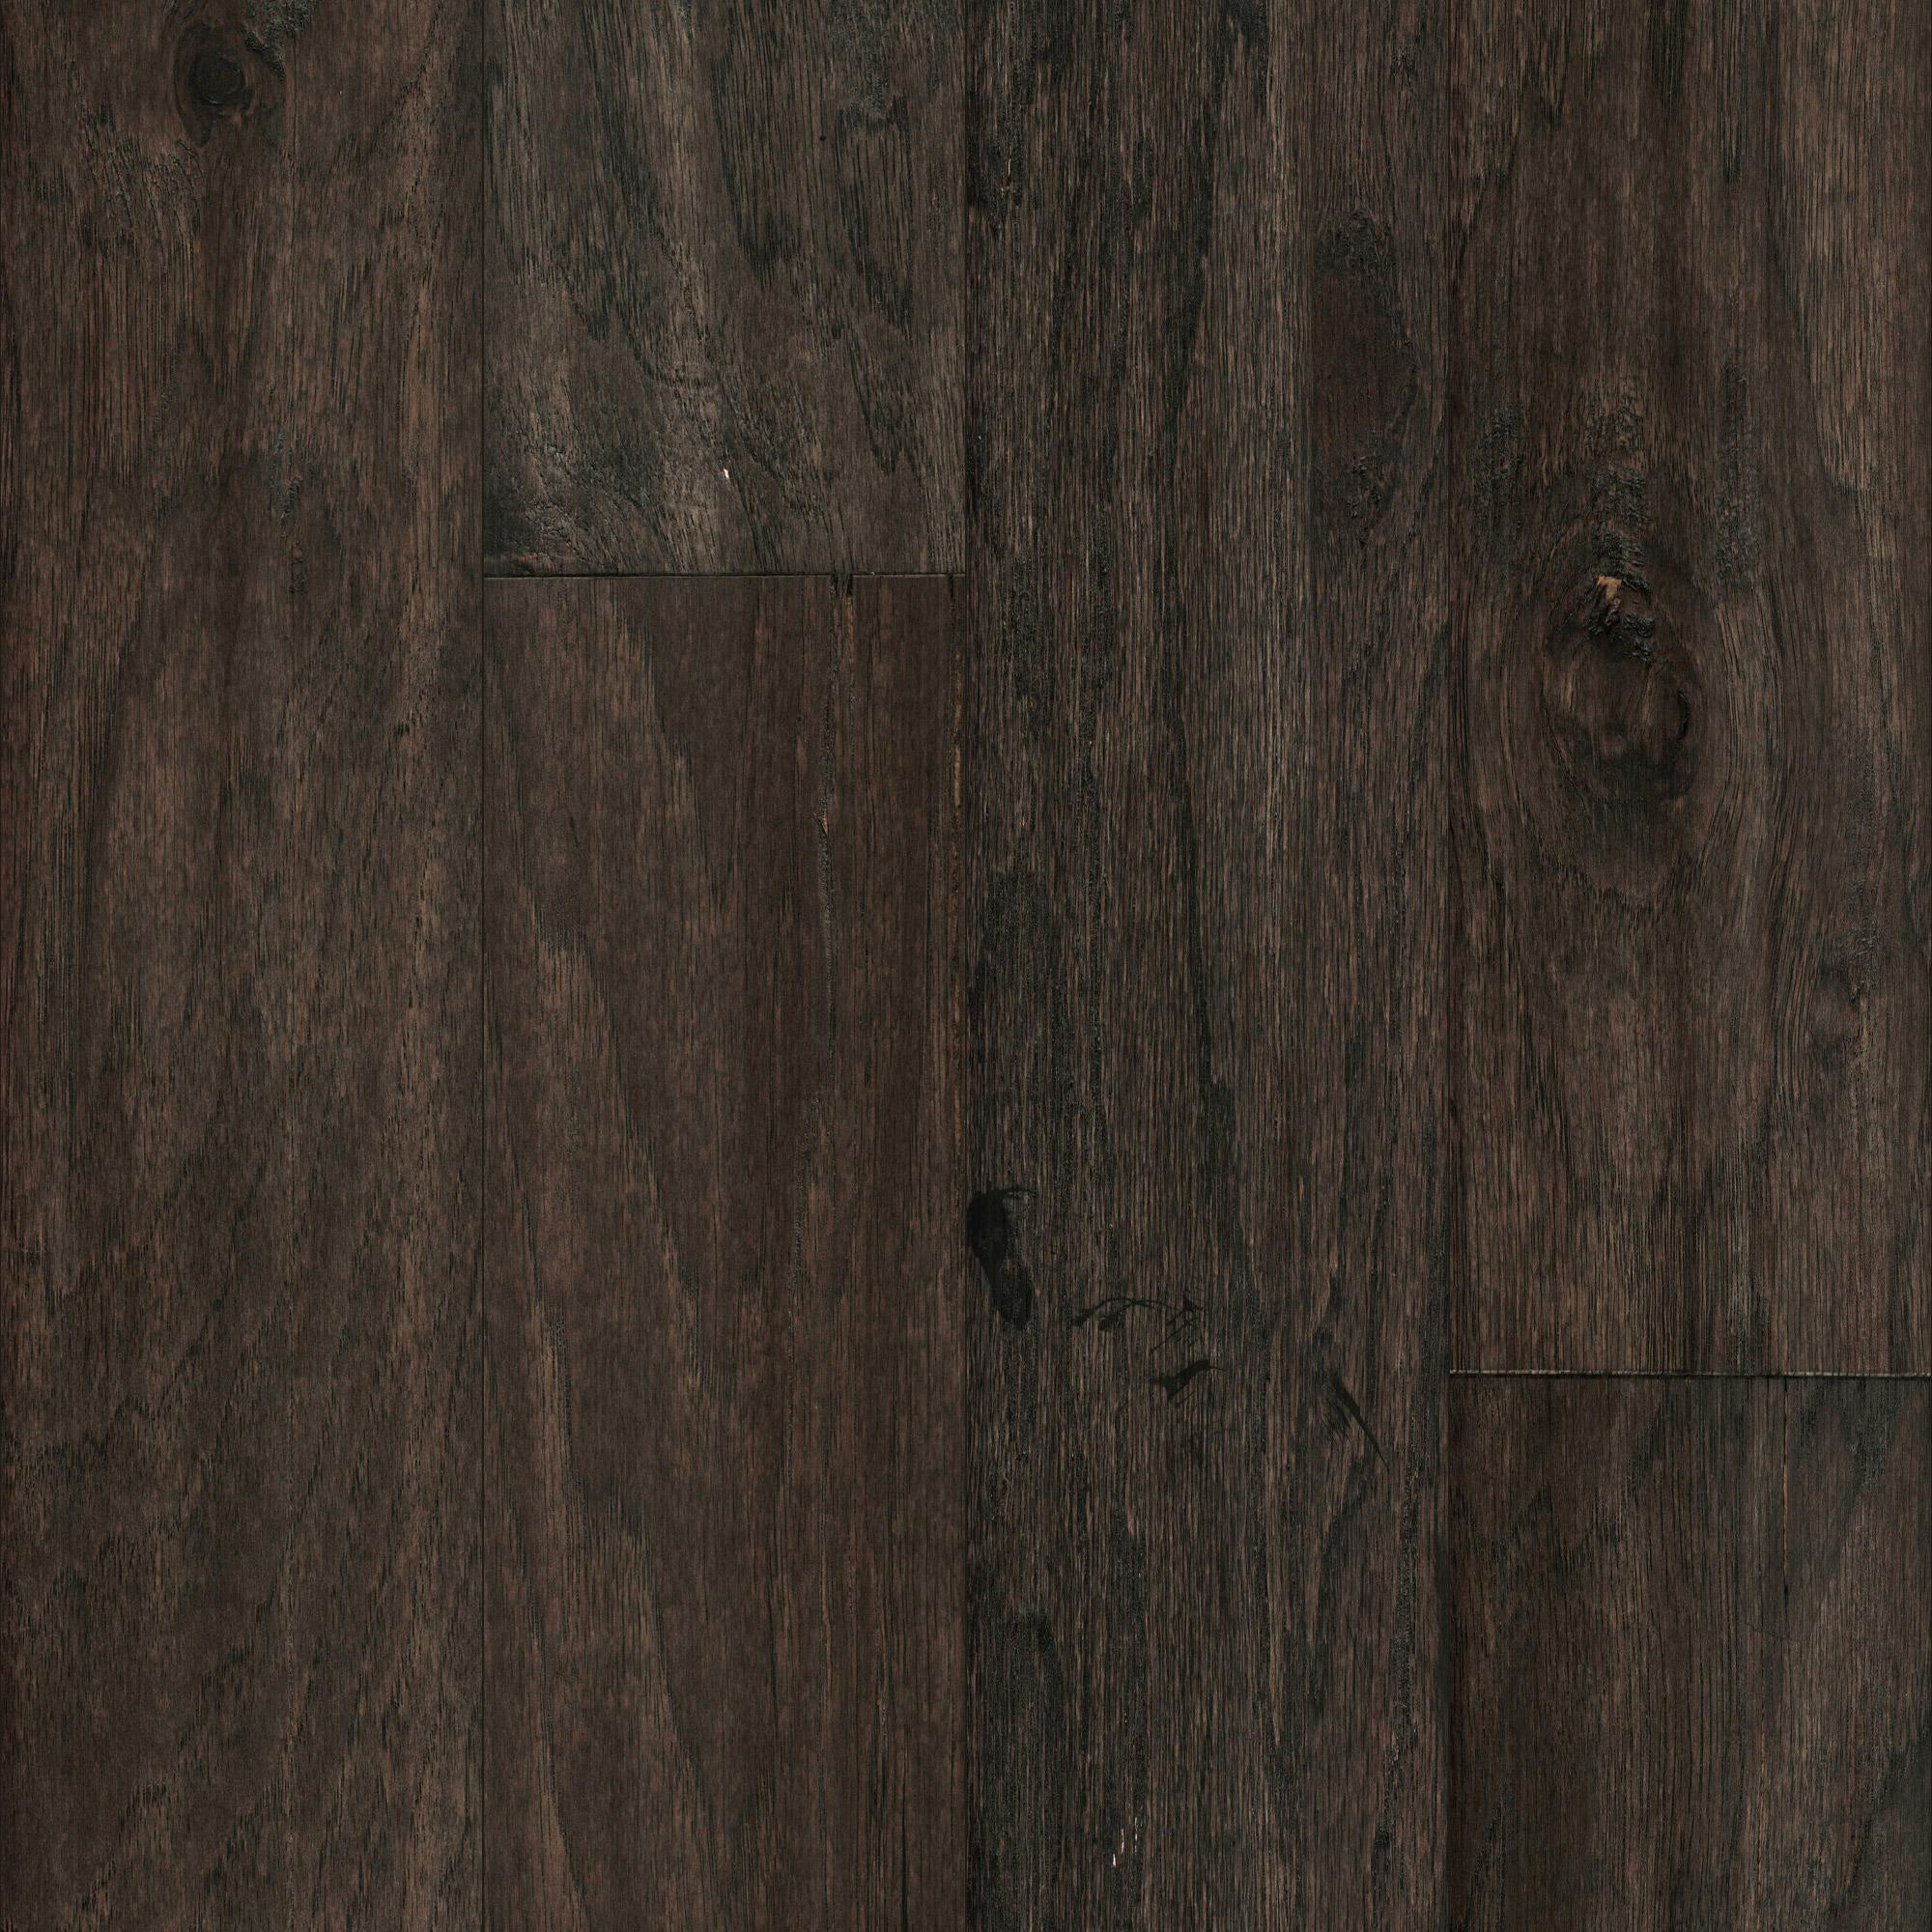 best hickory hardwood flooring of mullican lincolnshire sculpted hickory granite 5 engineered with regard to mullican lincolnshire sculpted hickory granite 5 engineered hardwood flooring